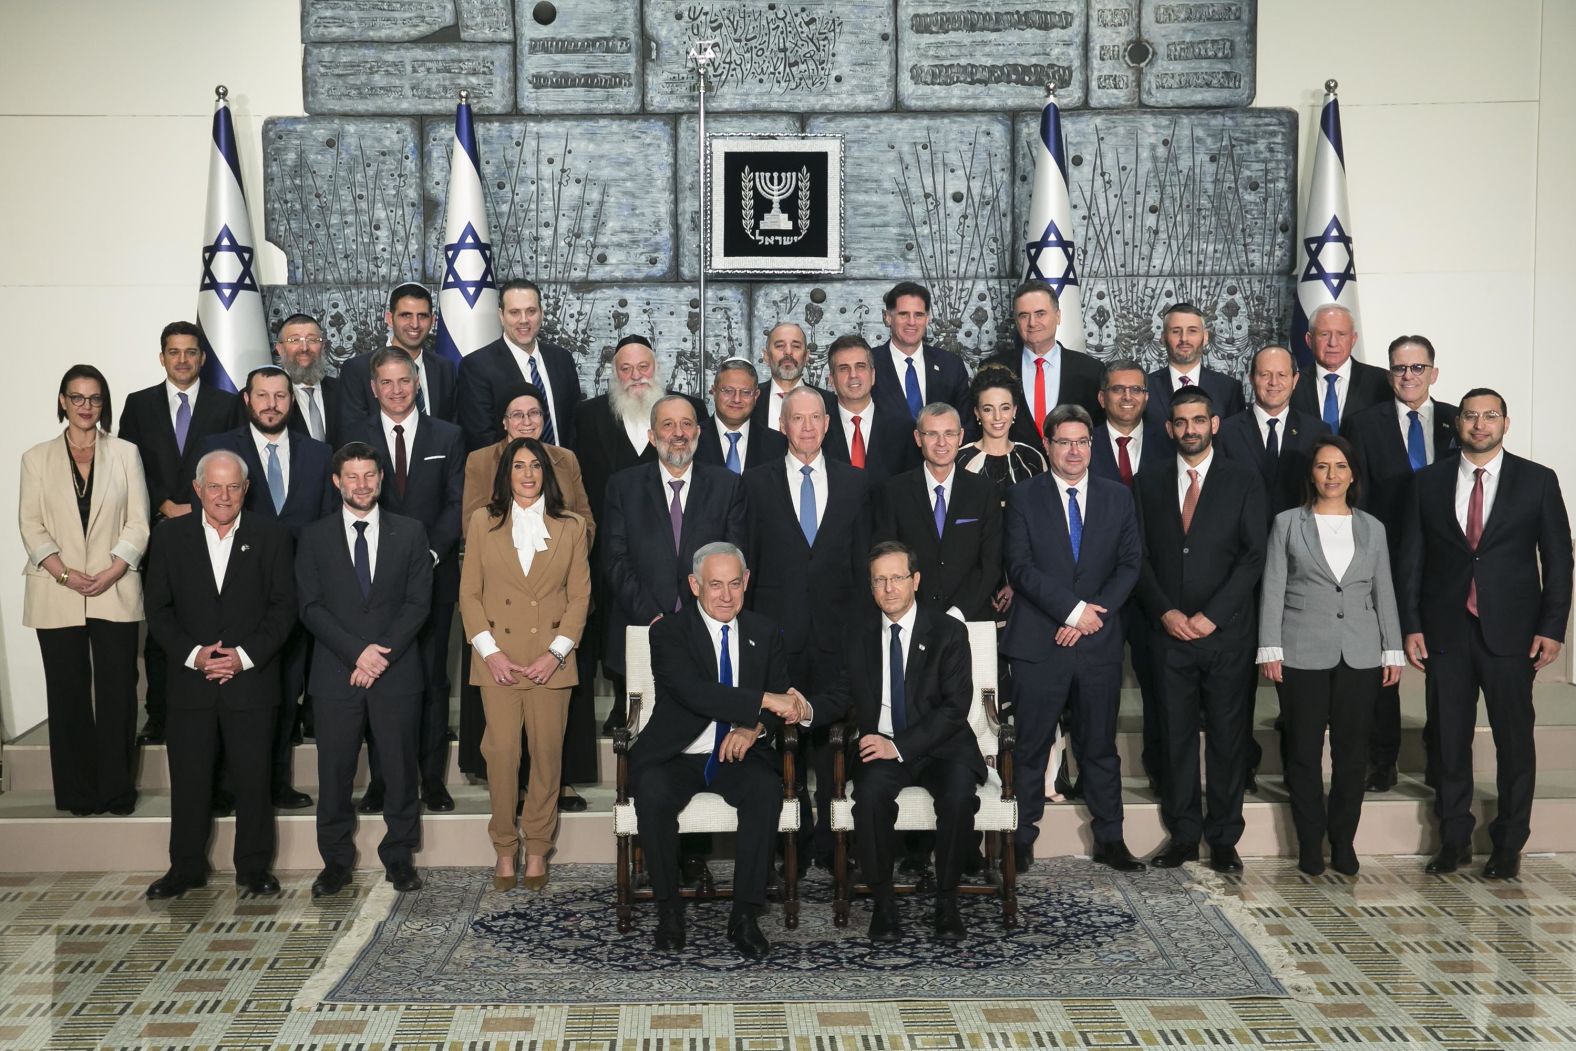 Netanyahu and Israeli President Isaac Herzog, front row, pose with members of the new Israeli government in December 2022. Netanyahu was <a href="https://edition.cnn.com/2022/12/29/middleeast/israel-benjamin-netanyahu-swearing-in-intl/index.html" target="_blank">sworn in for his sixth term as prime minister</a>, 18 months after he was ousted from power.